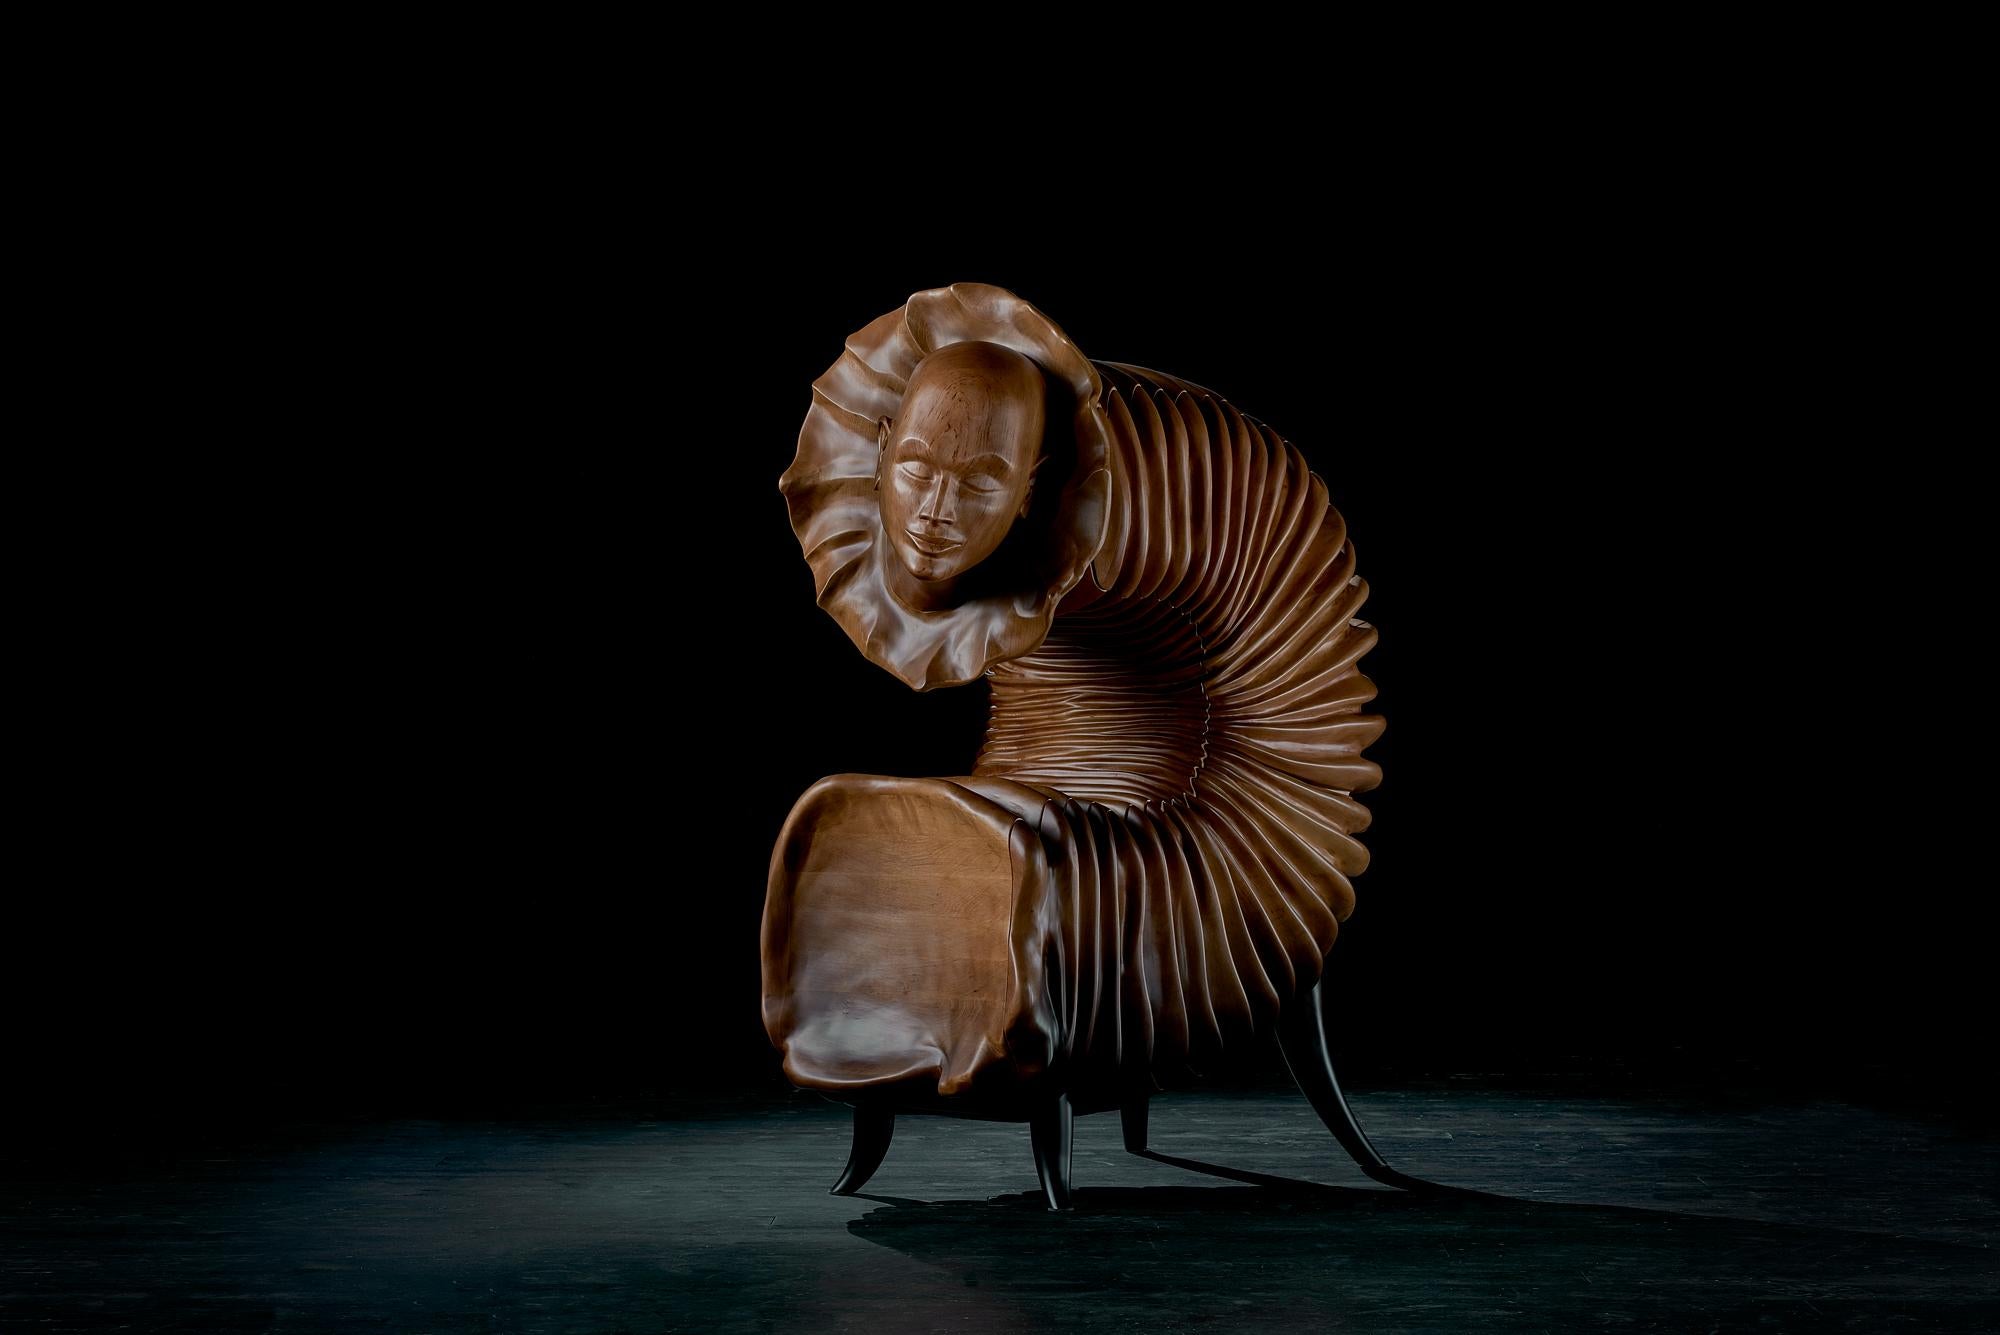 Lithuanian 'The Dreamer' Limited Edition Sculptural Cabinet from Egli Design